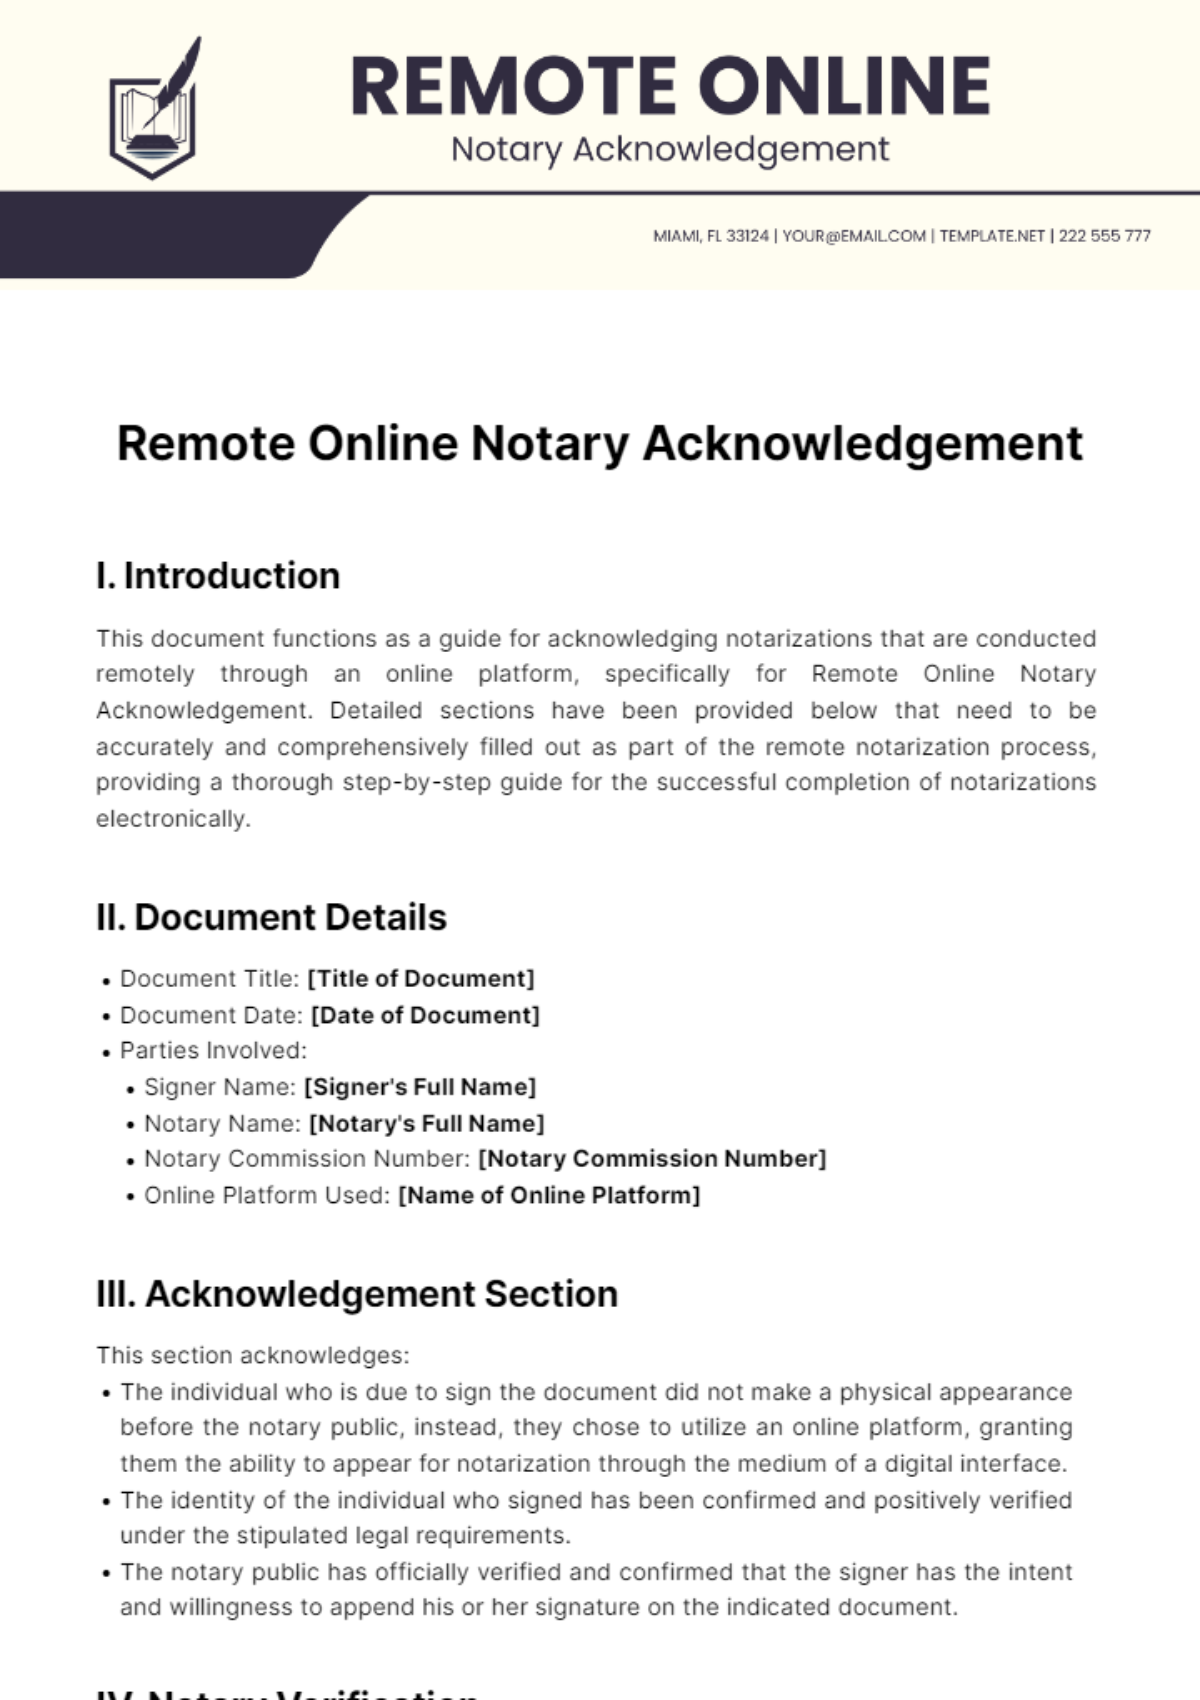 Free Remote Online Notary Acknowledgement Template